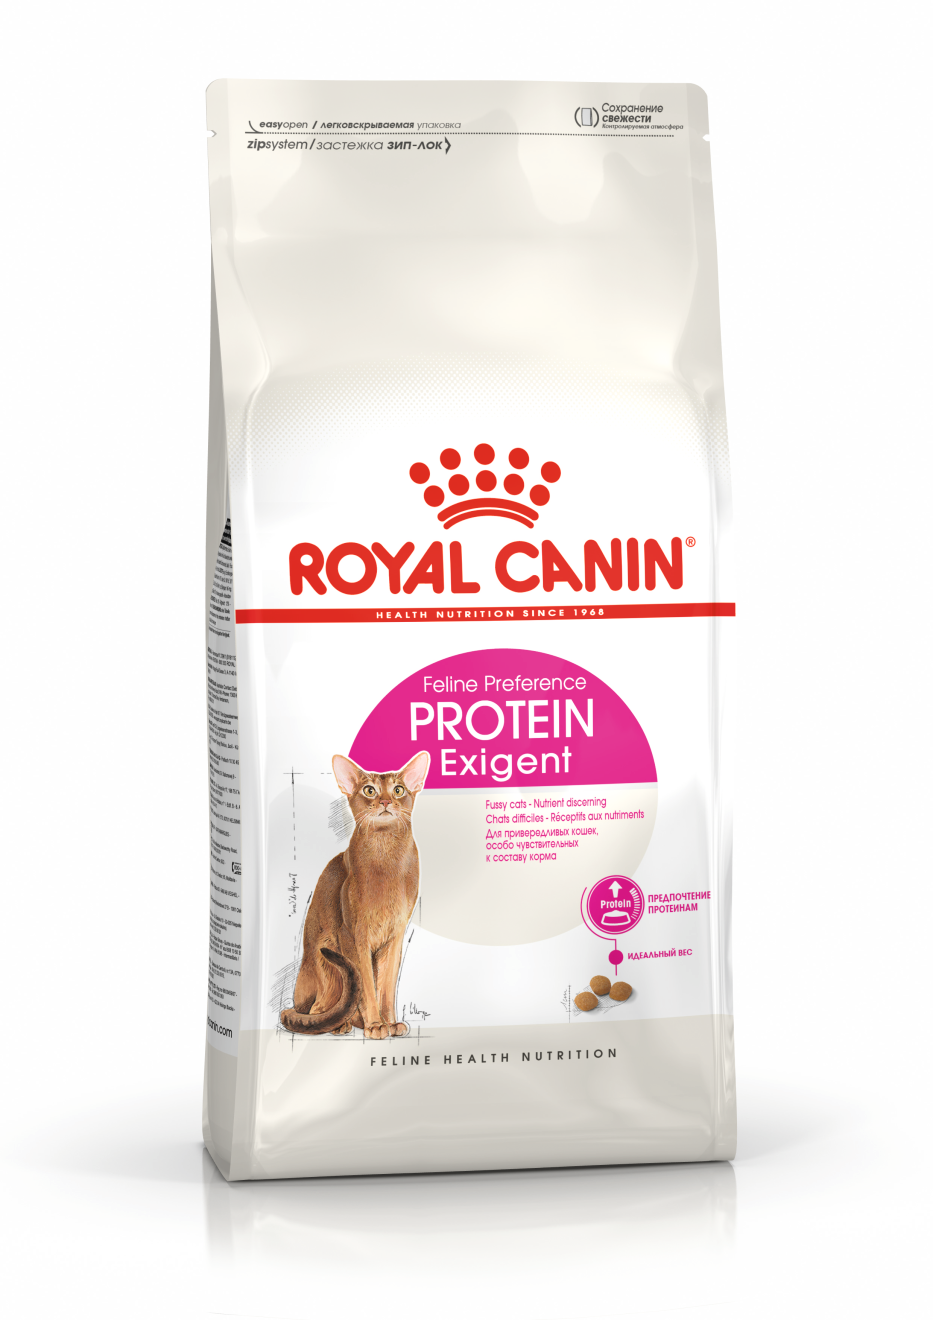 Protein Exigent Dry - Royal Canin